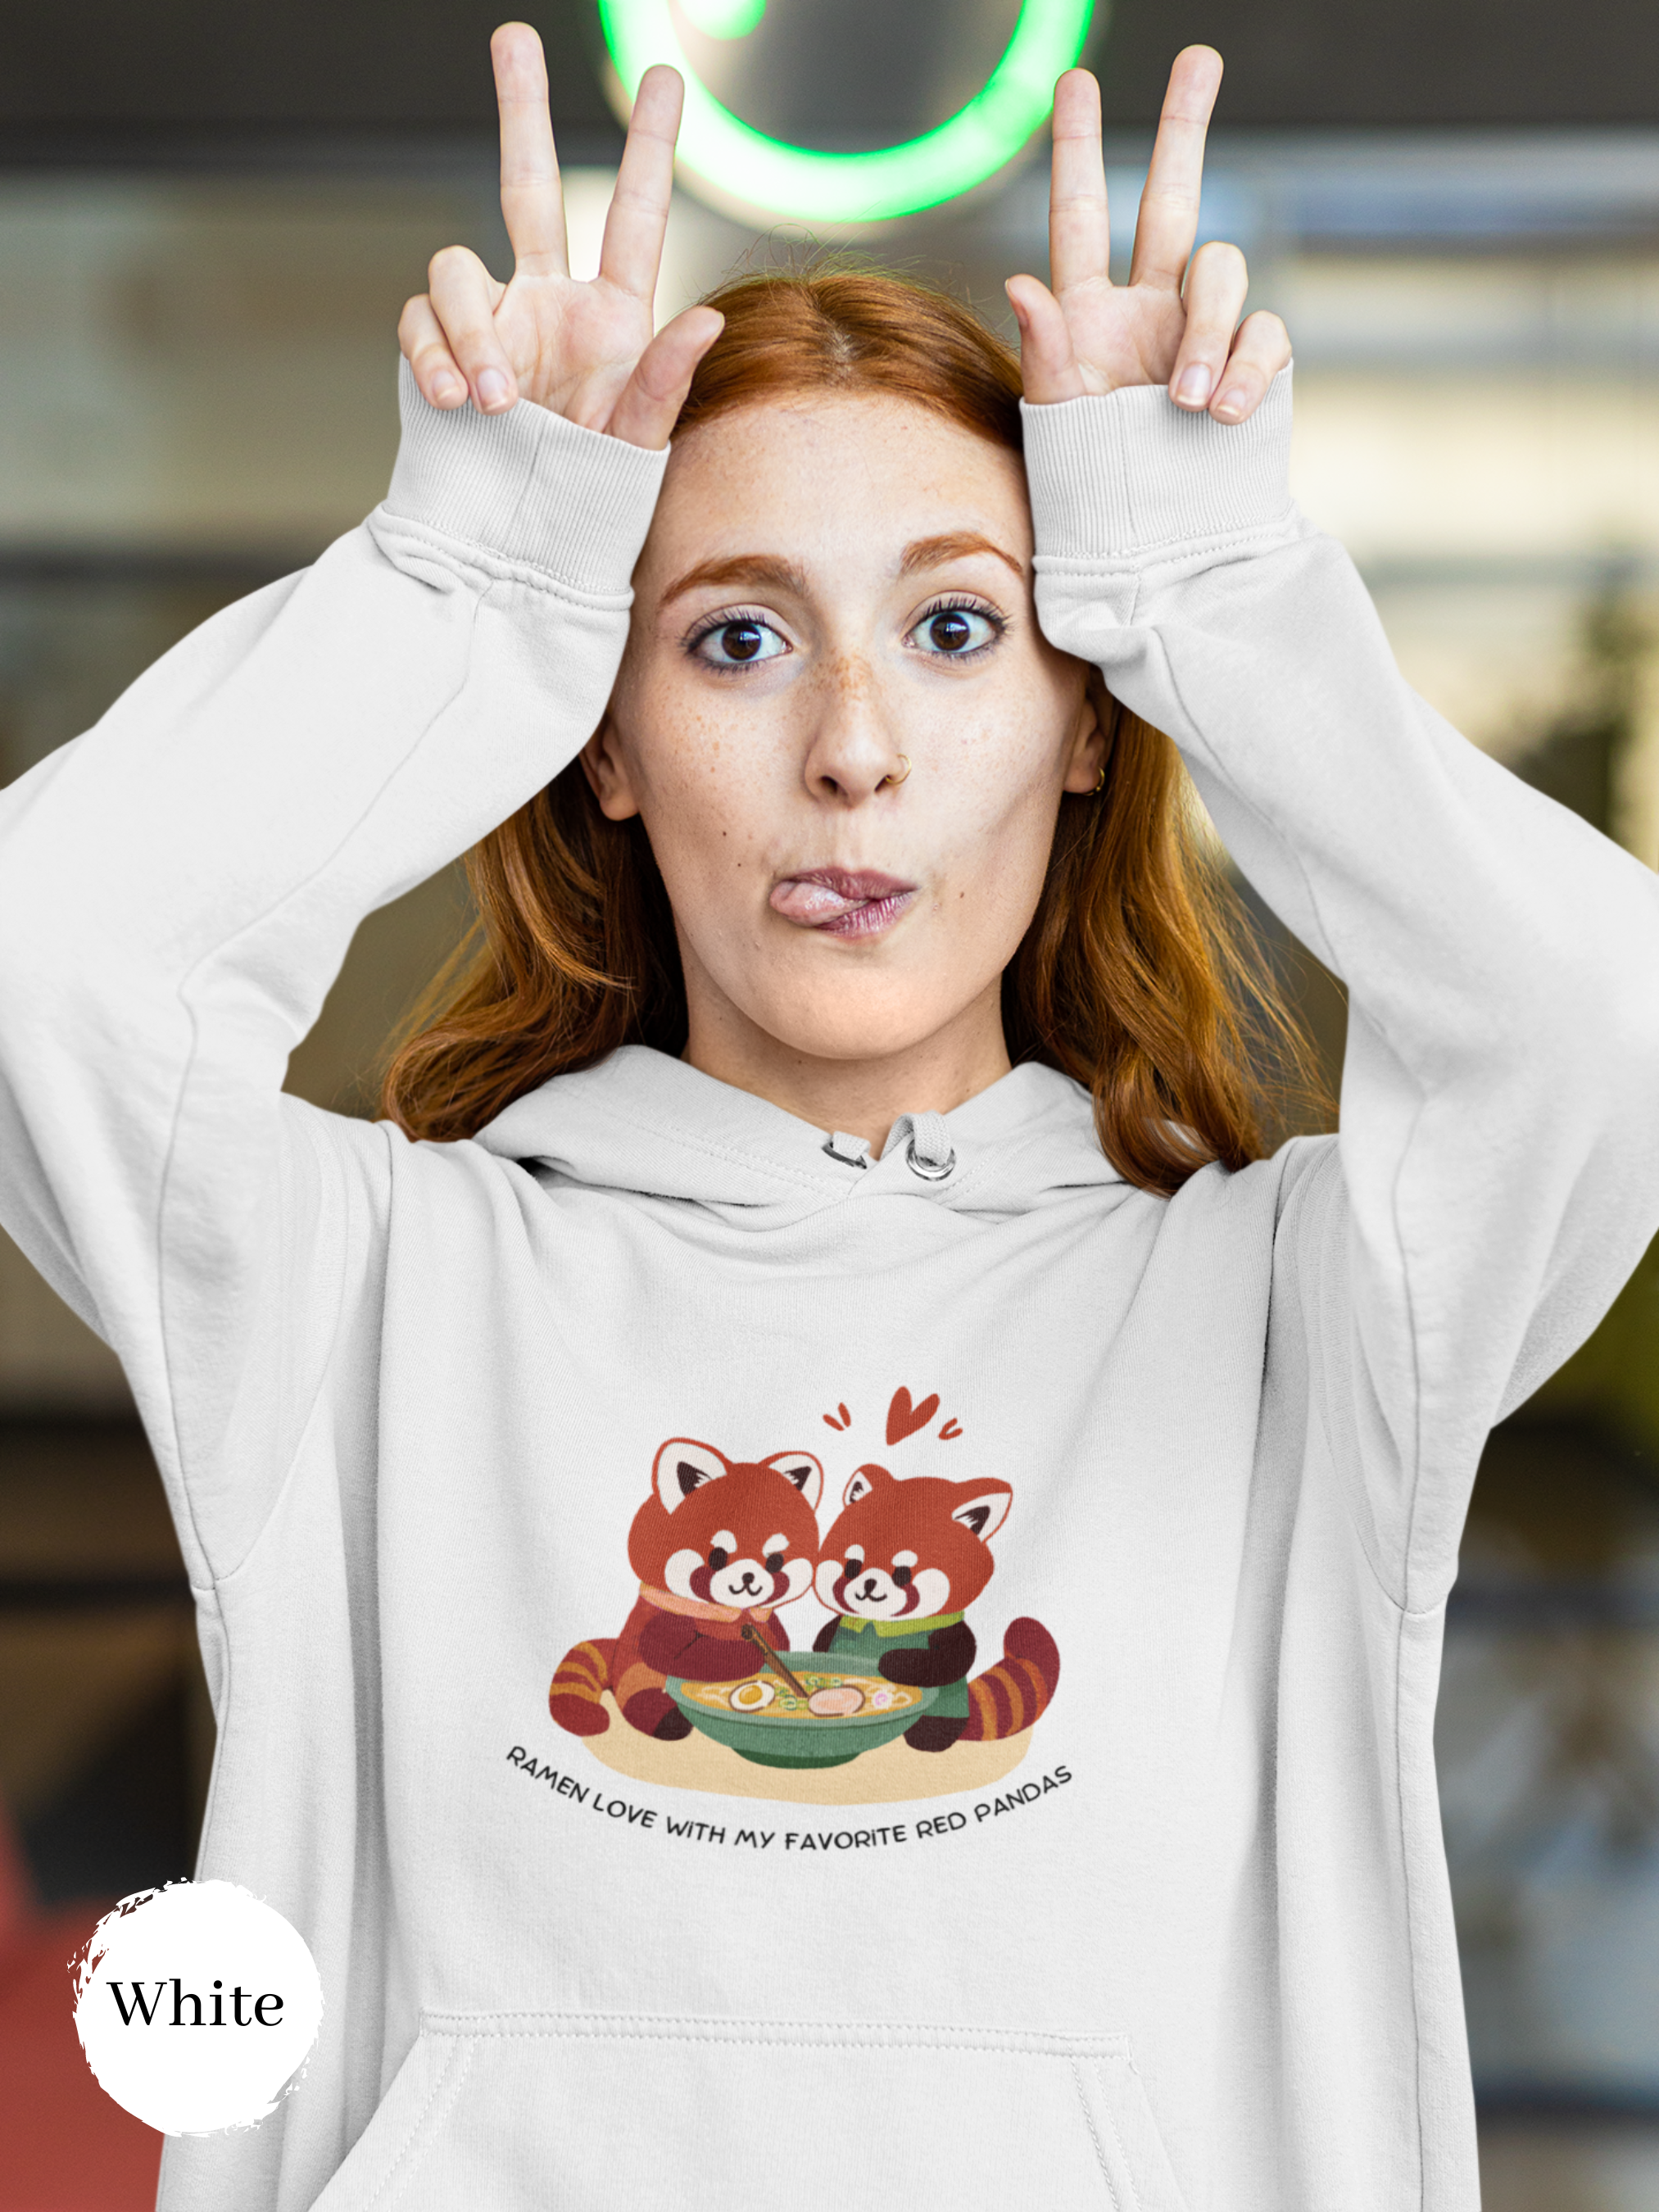 Ramen Hoodie: Red Panda Love Edition - A Foodie Hoodie for Fans of Ramen Art and Asian Cuisine